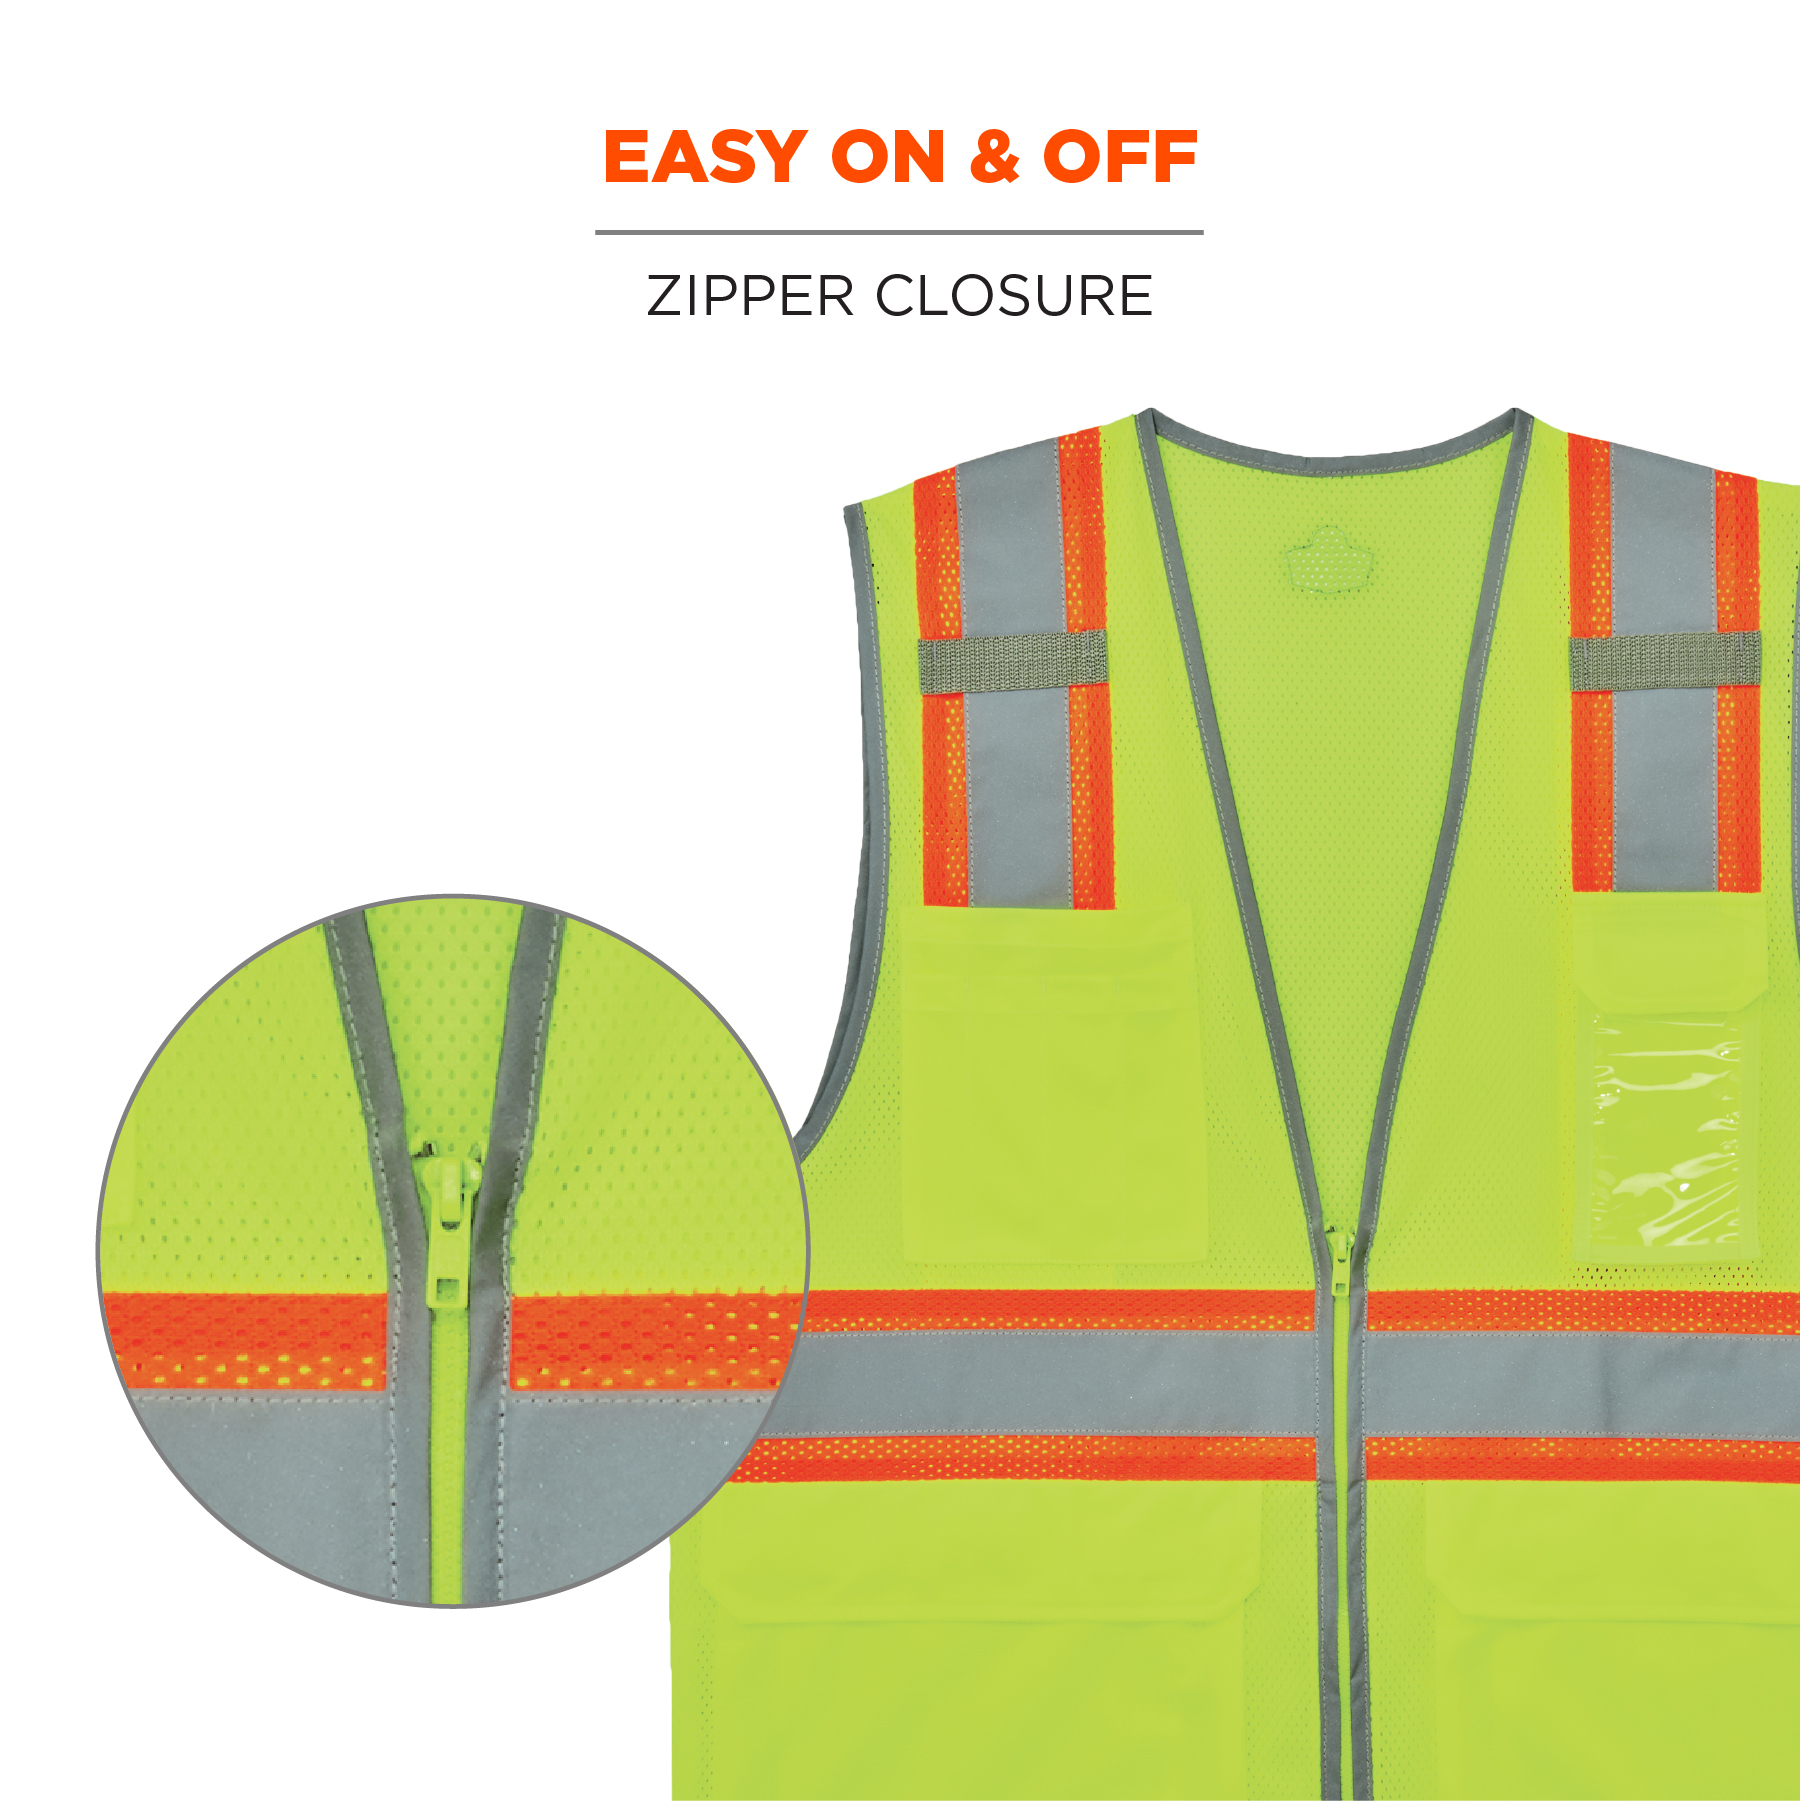 Large Mutual 16363 High Visibility Polyester ANSI Class 3 Solid Safety Vest with 2 Silver Reflective Stripes Lime 